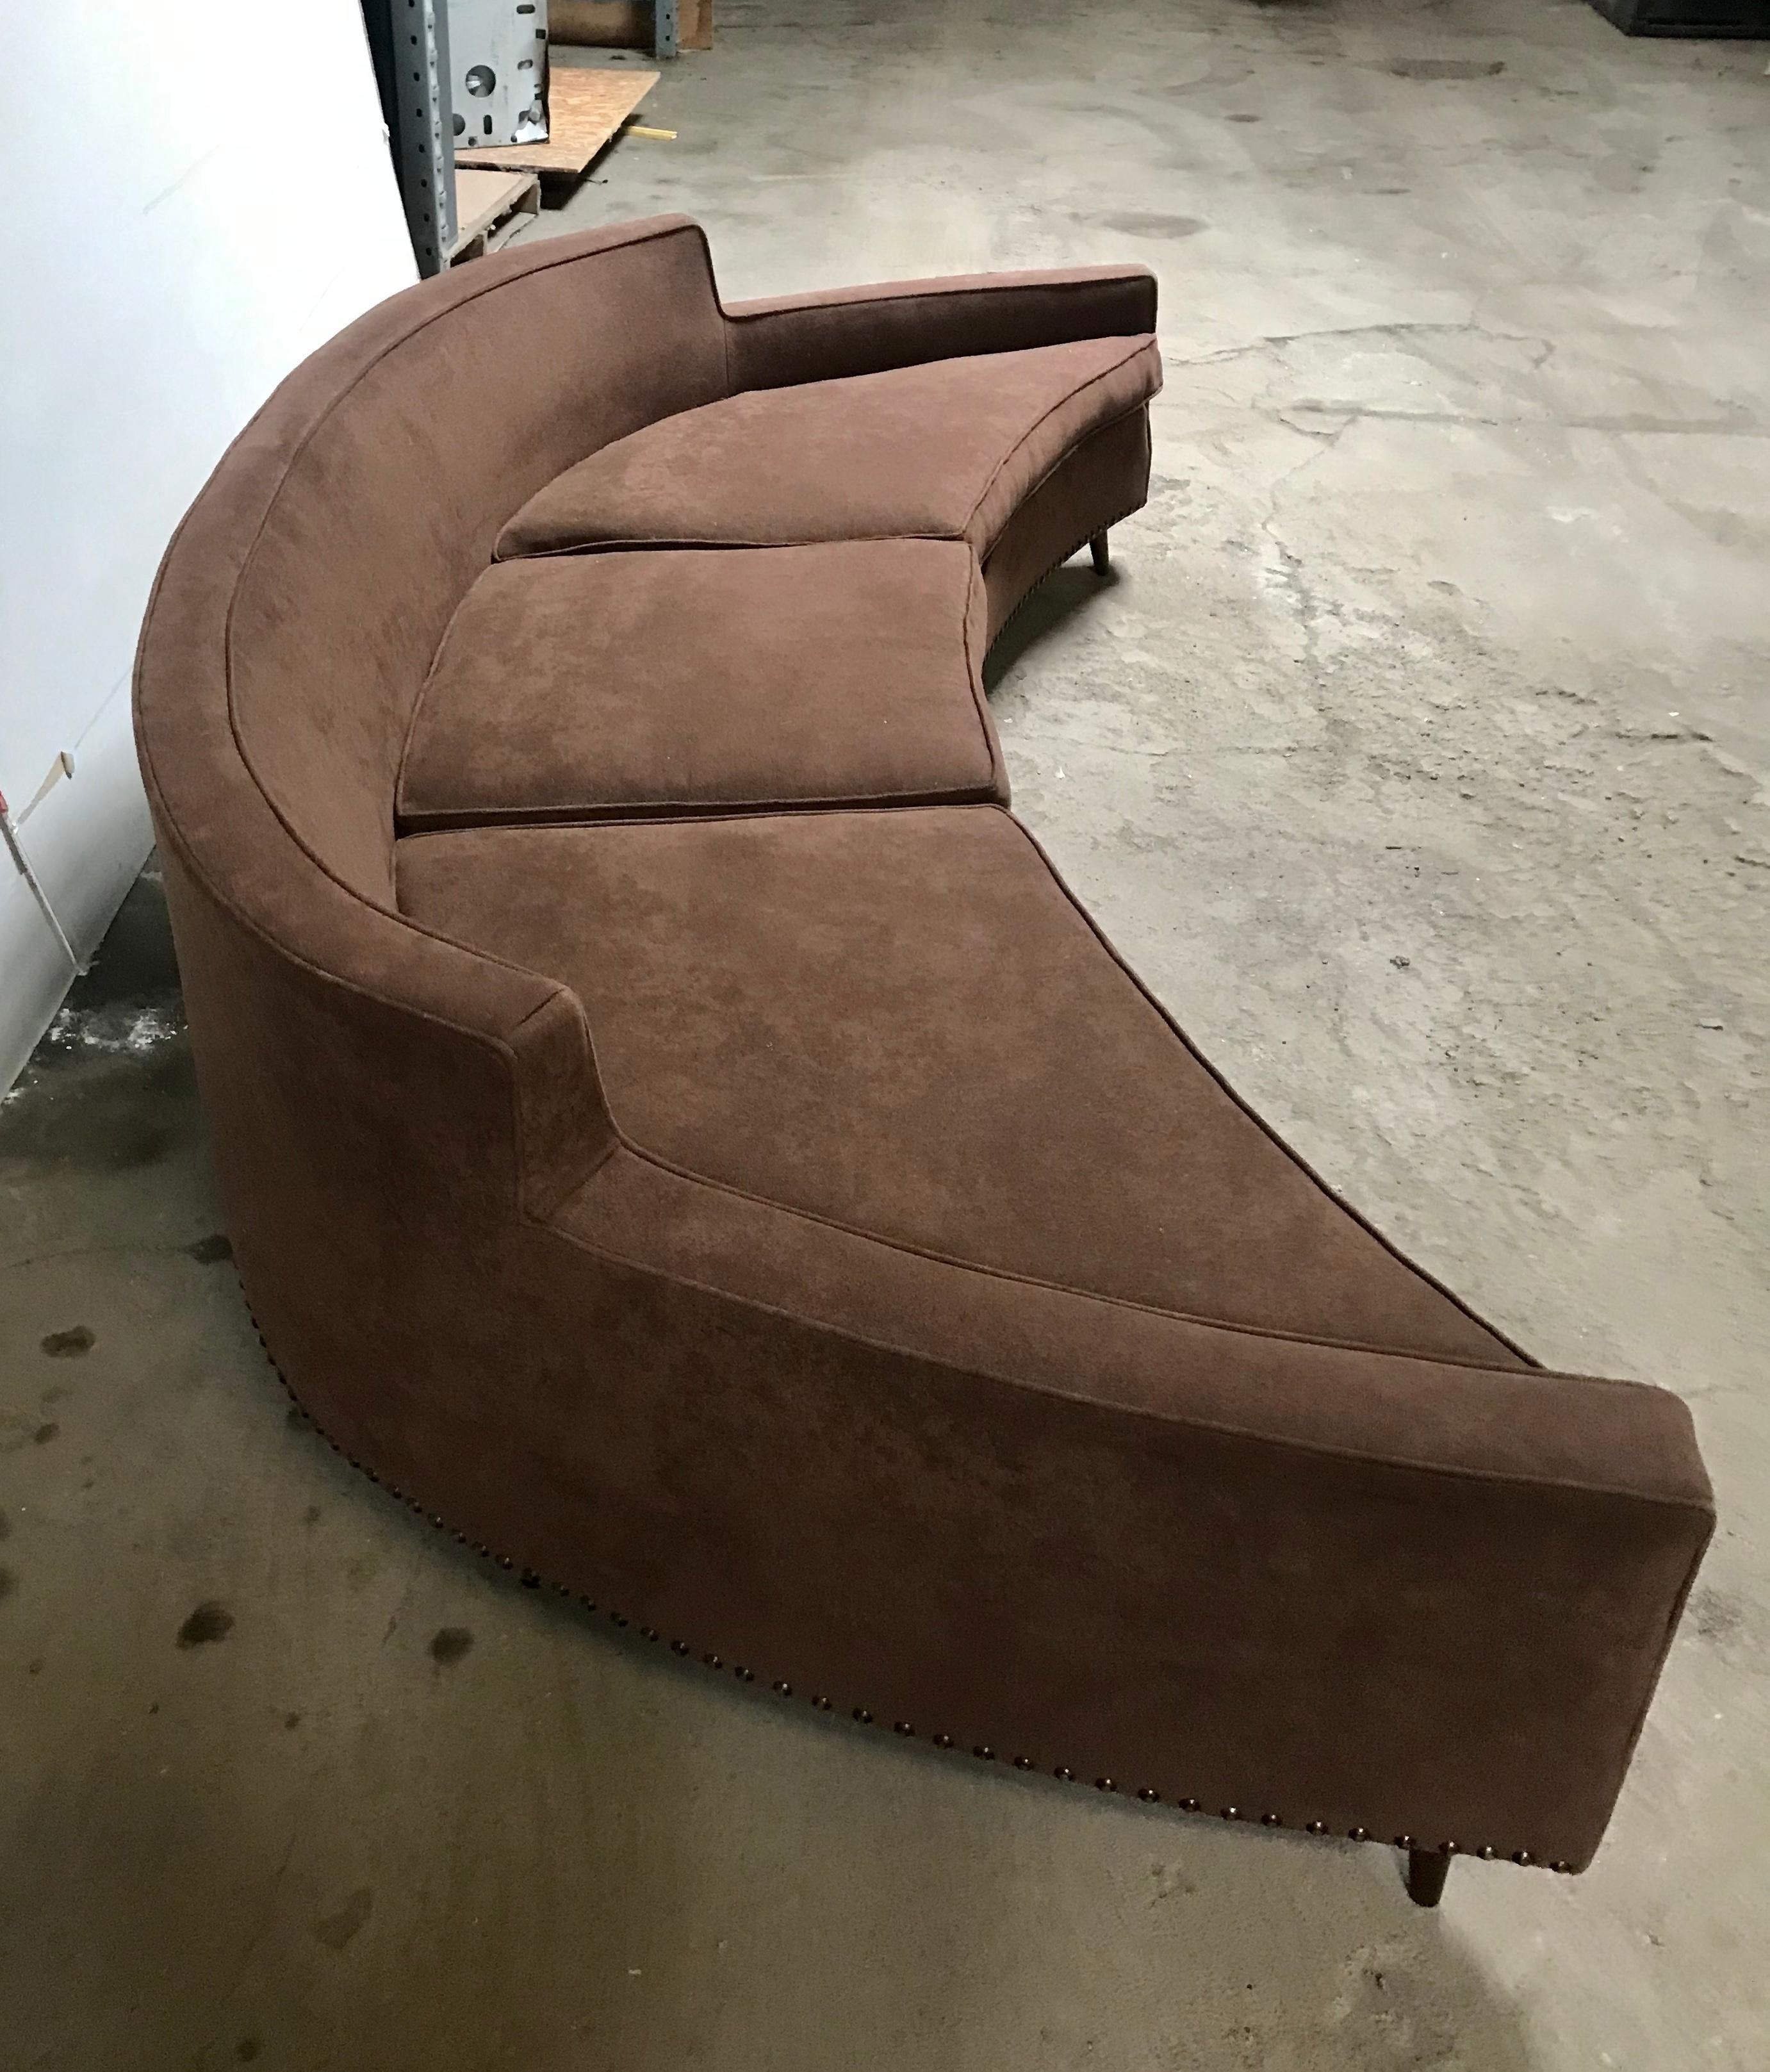 Stunning Harvey Probber style curved sofa, circa 1960. Recently reupholstered in chocolate brown cotton wool fabric, elegant, sleek, simple design. Fit seamlessly in any modern, contemporary, eclectic interior. Hand delivery avail to New York City